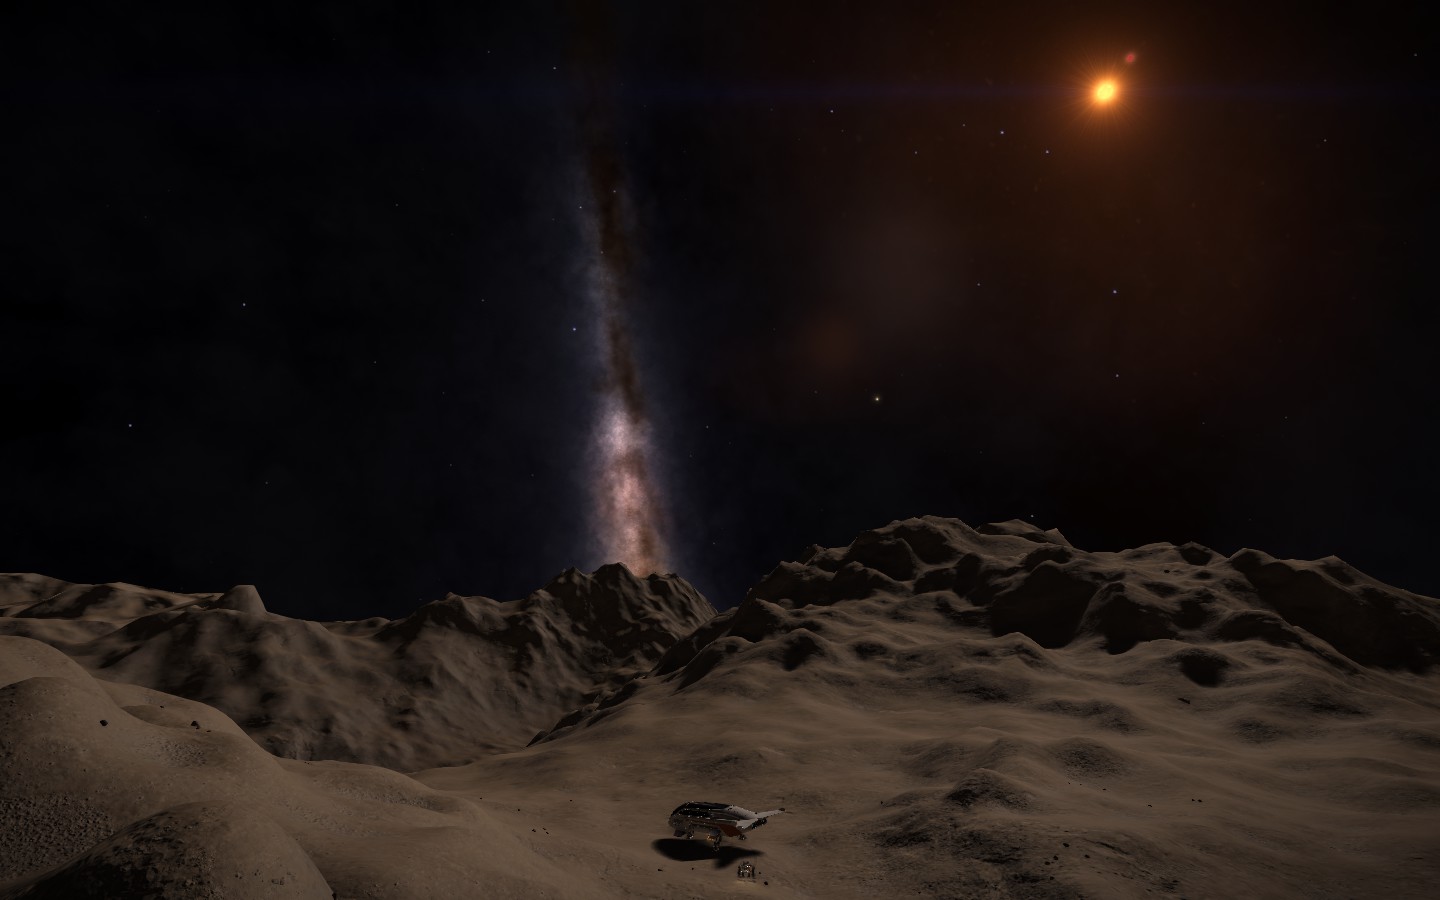 Nice landscape on this binary system